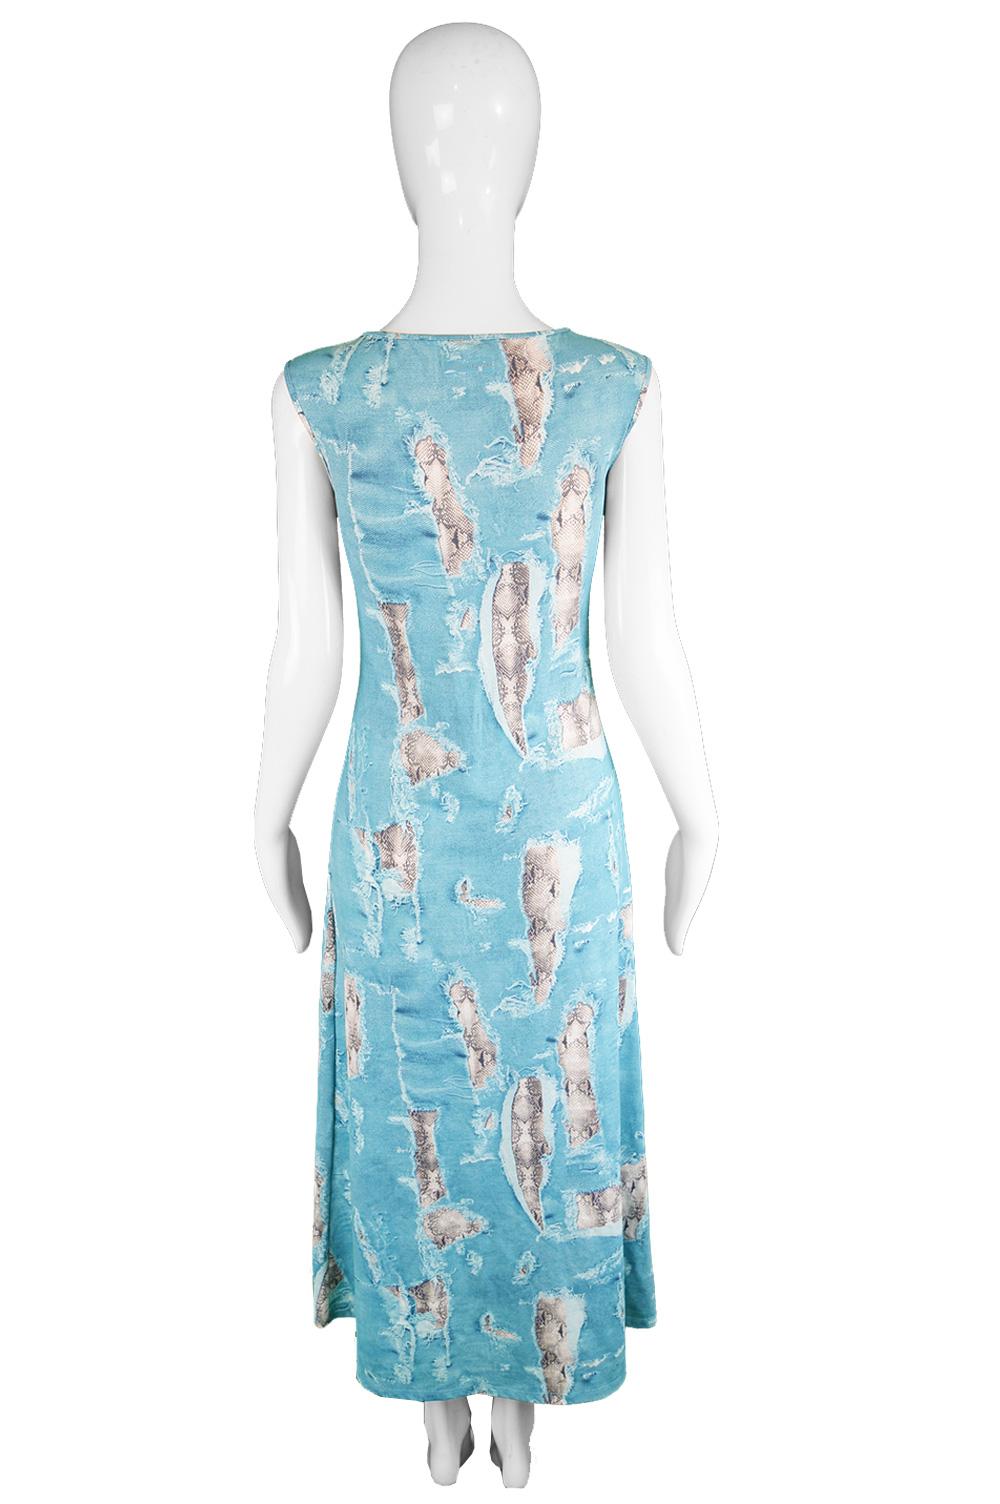 Krizia Vintage Sleeveless Blue Rip Snakeskin Print Stretch Jersey Dress, 1990s  In Excellent Condition For Sale In Doncaster, South Yorkshire